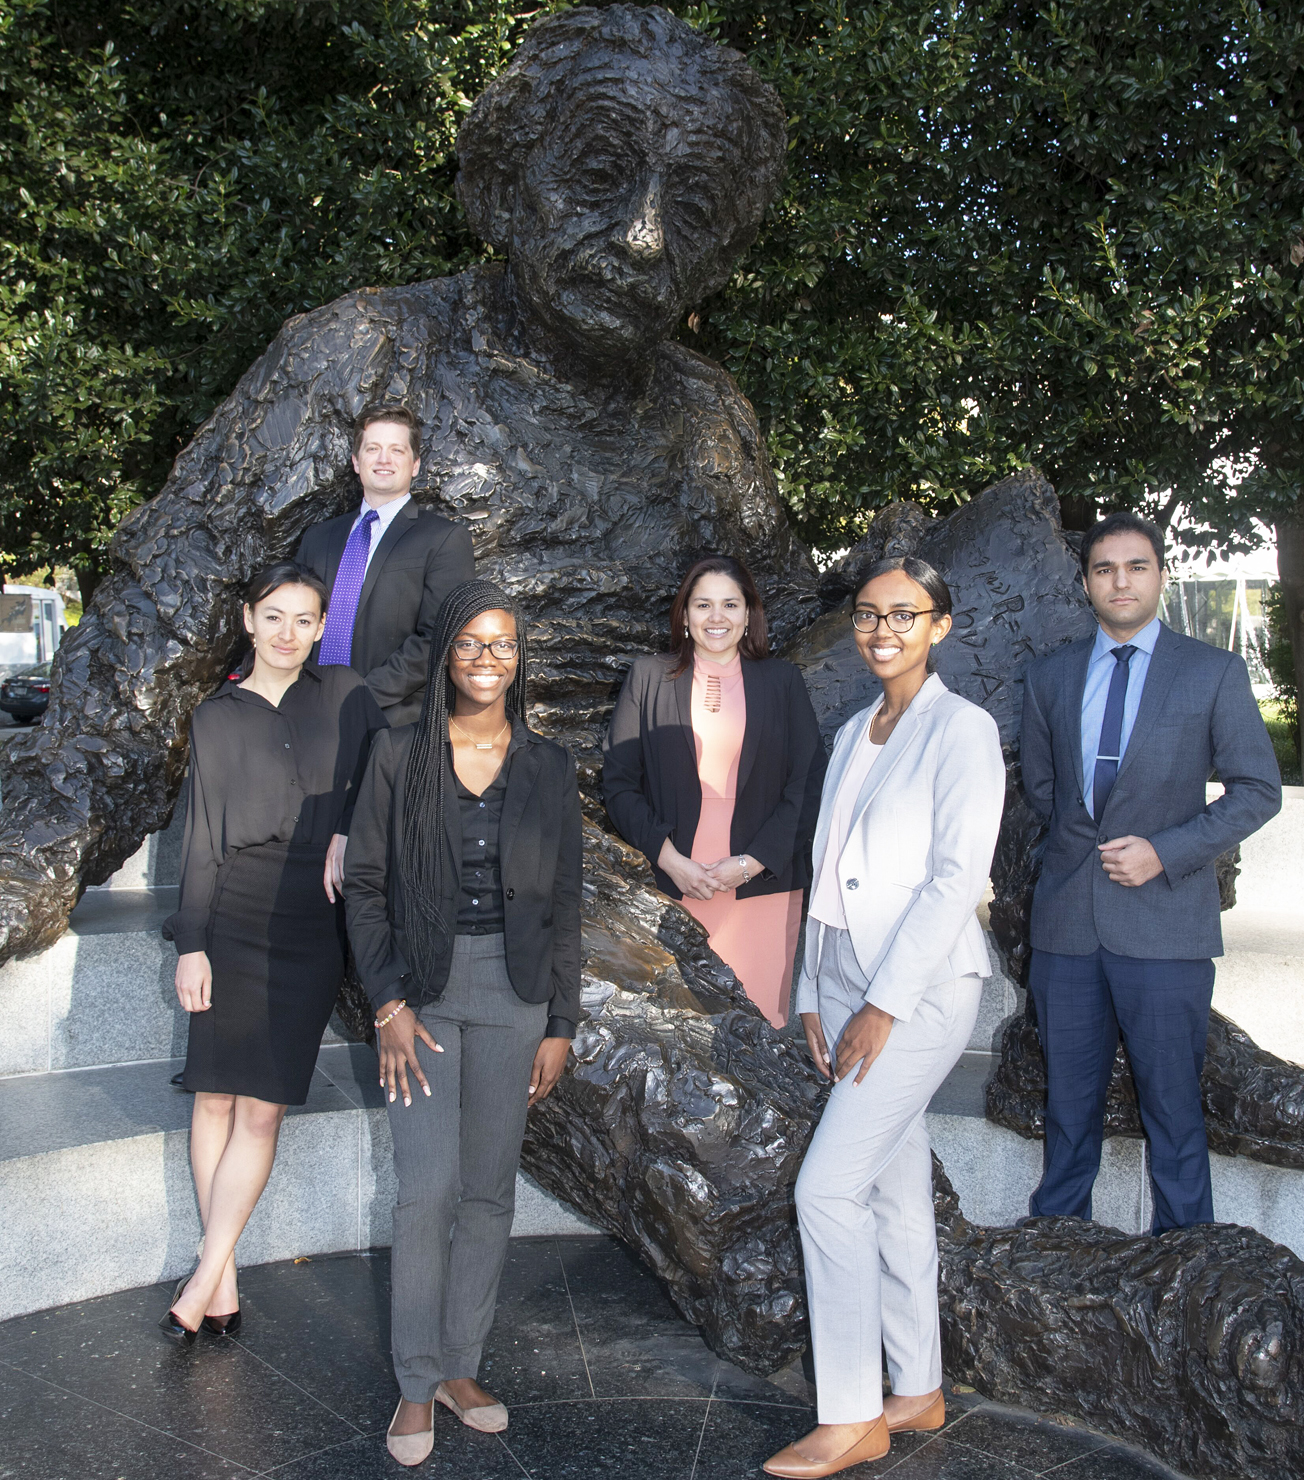 Members of the first-place team in the National Academy of Medicine’s DC Public Health Case Challenge, l-to-r,  UMB students Ava Hawkinson, UM School of Social Work (UMSSW); Christopher Reed; UM Carey Law; Brendaline Nettey, UMSSW; Stephanie Sanchez, UM School of Medicine (UMSOM); Meron Assefa, UM School of Pharmacy; and Shaikh Afaq, UMSOM.